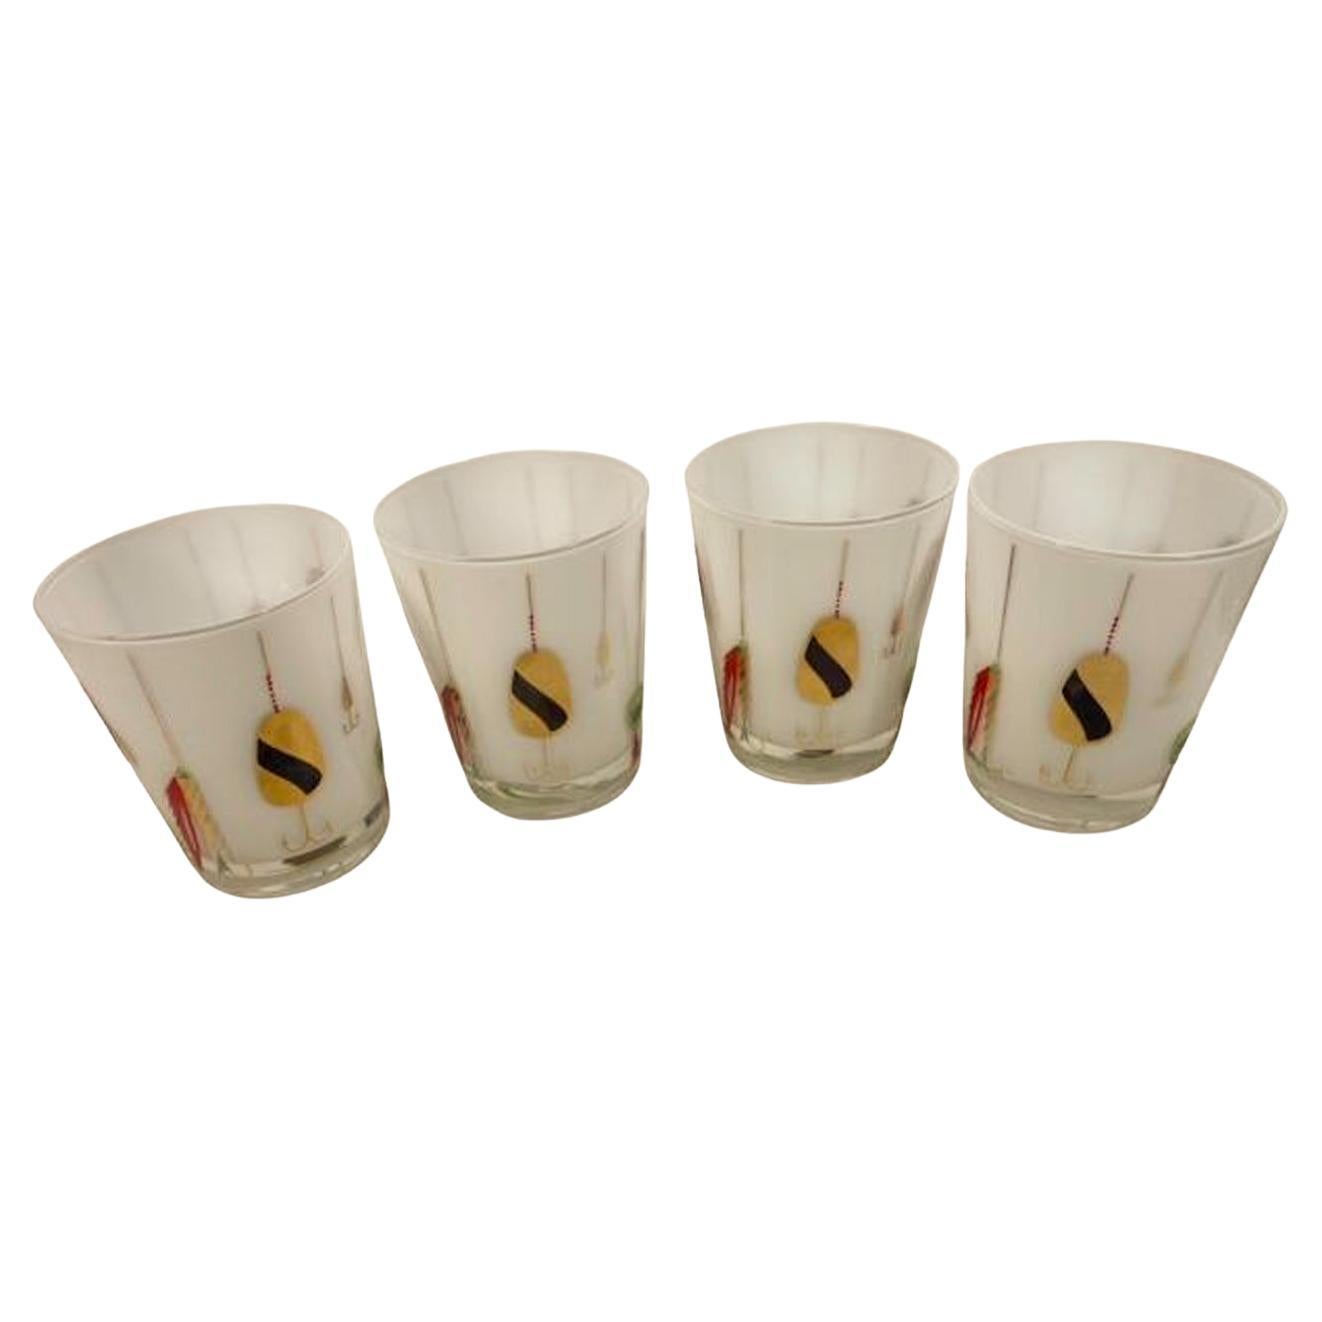 Set of four mid-century modern double old fashioned glasses with fishing lures in colored enamels and 22 karat gold with raised textured designs on clear glass with white frosted interiors.